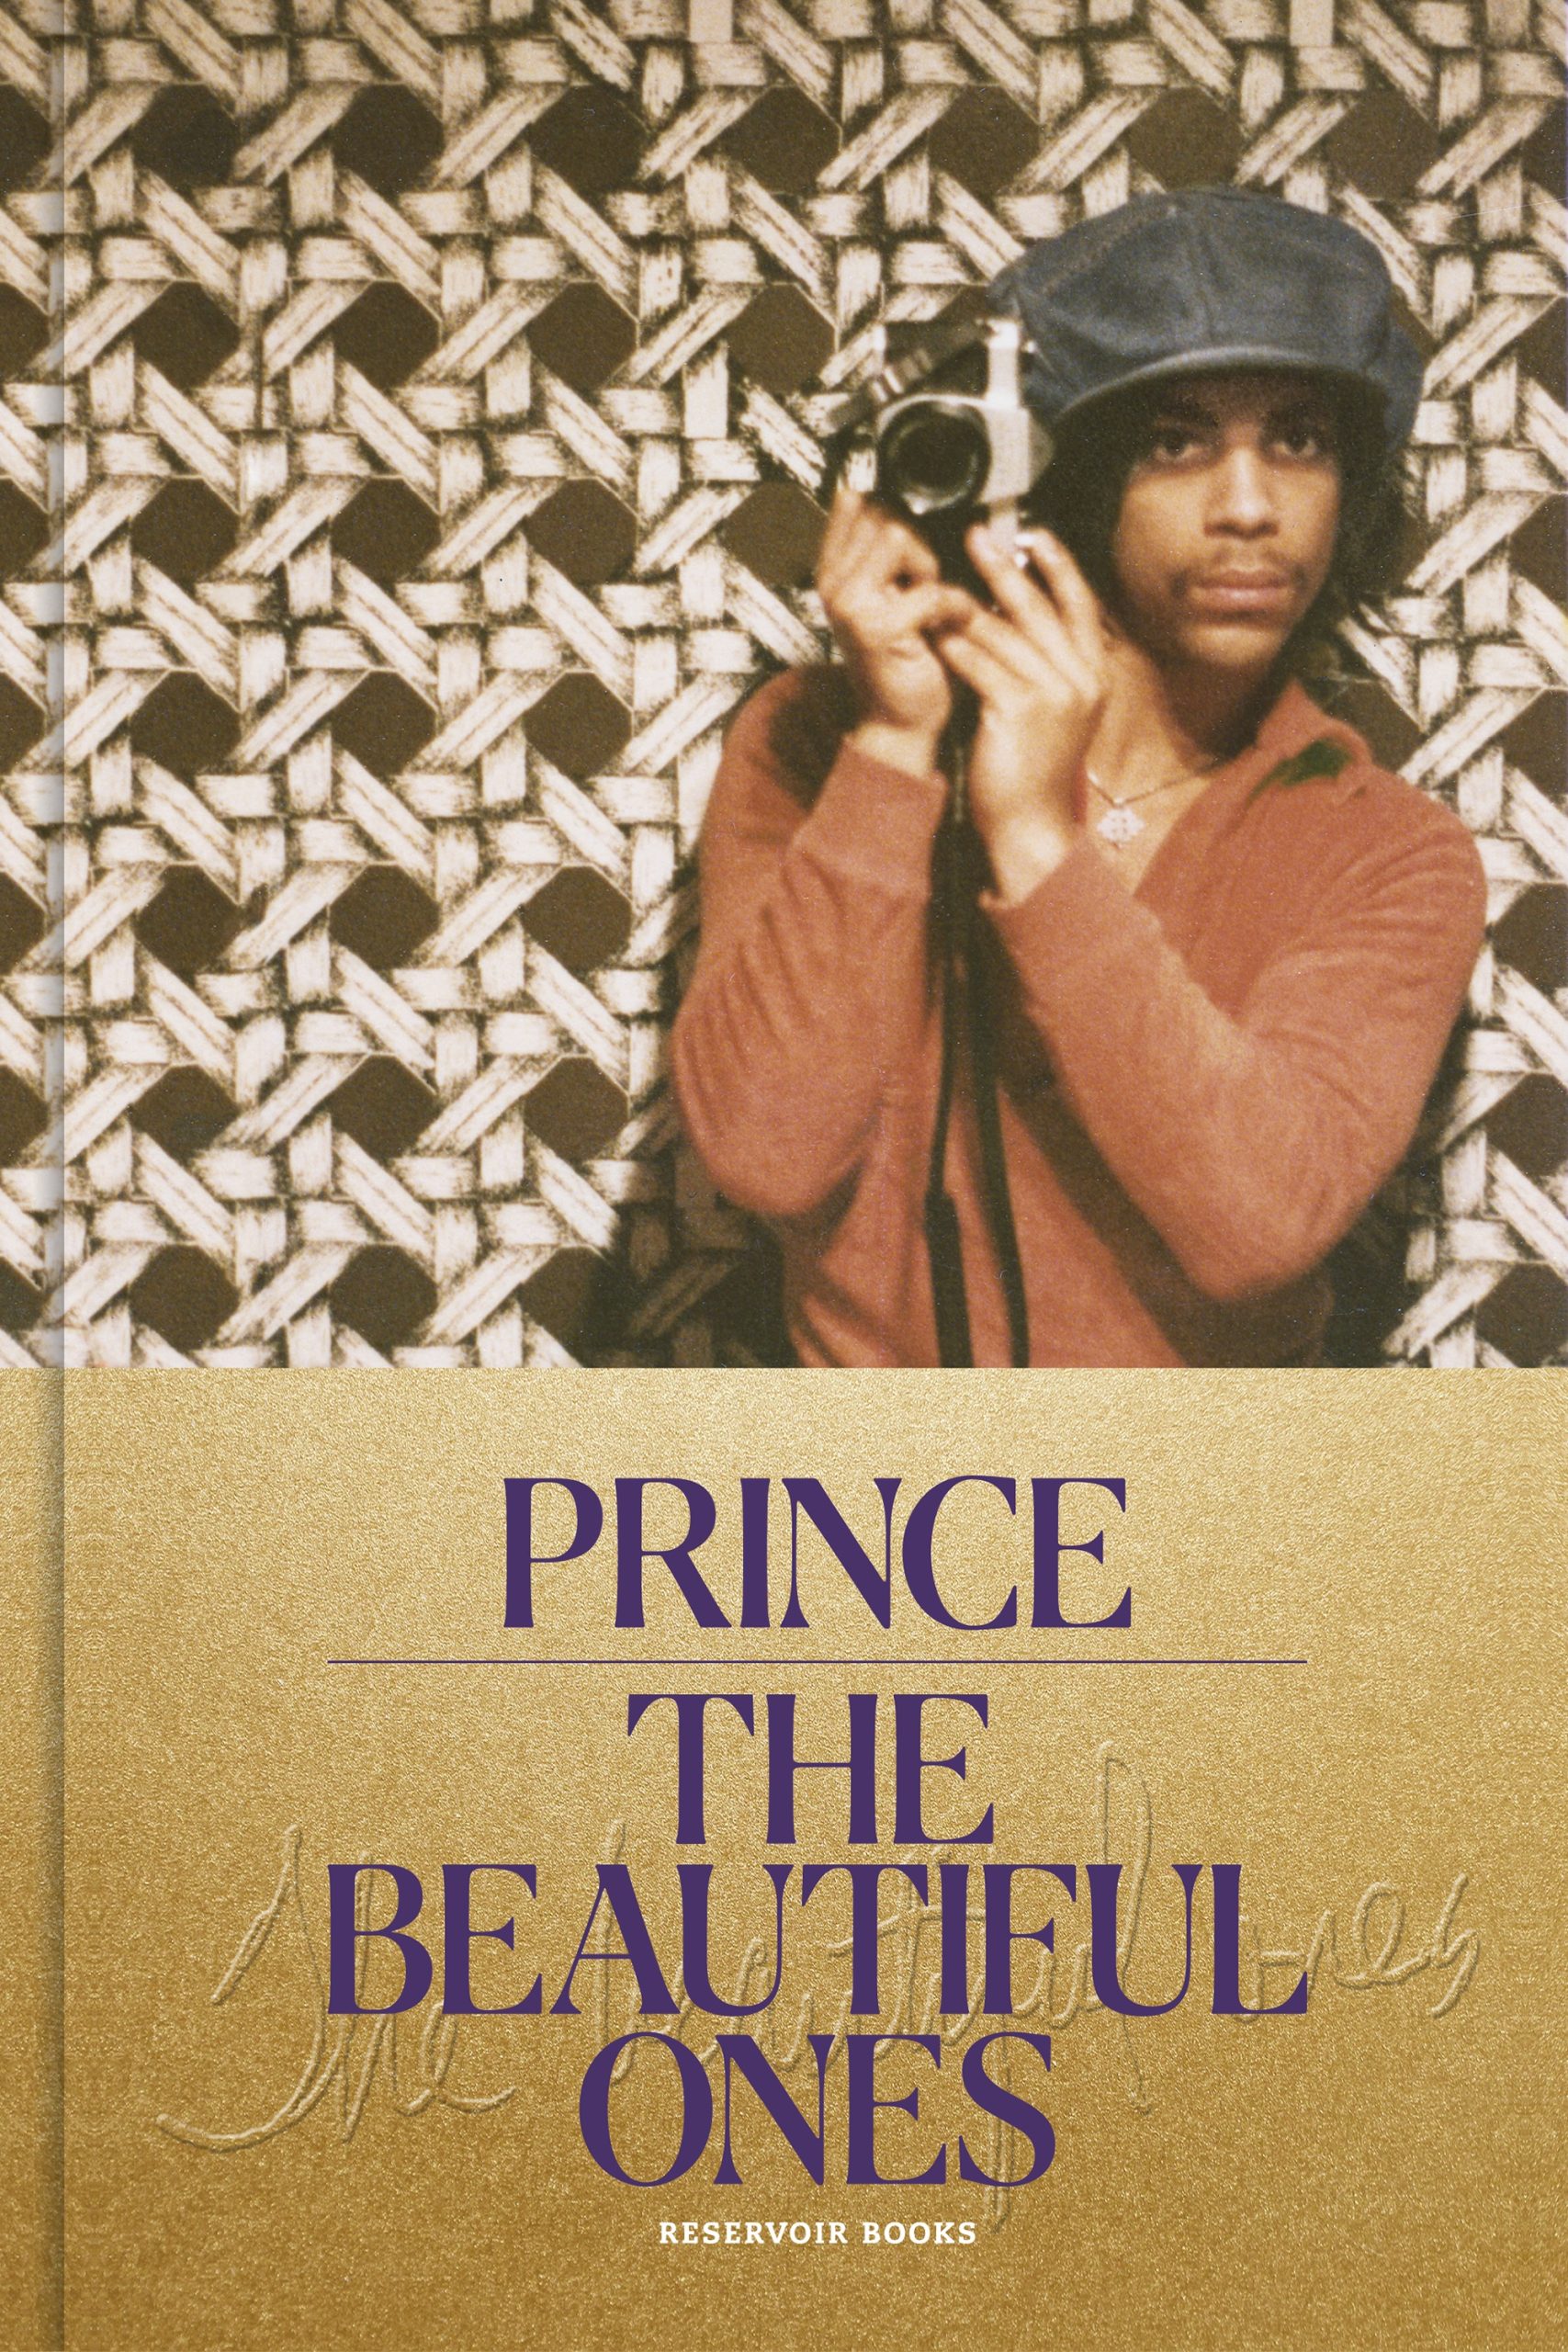 The beautiful ones - Prince - Reservoir books - 9788417511920